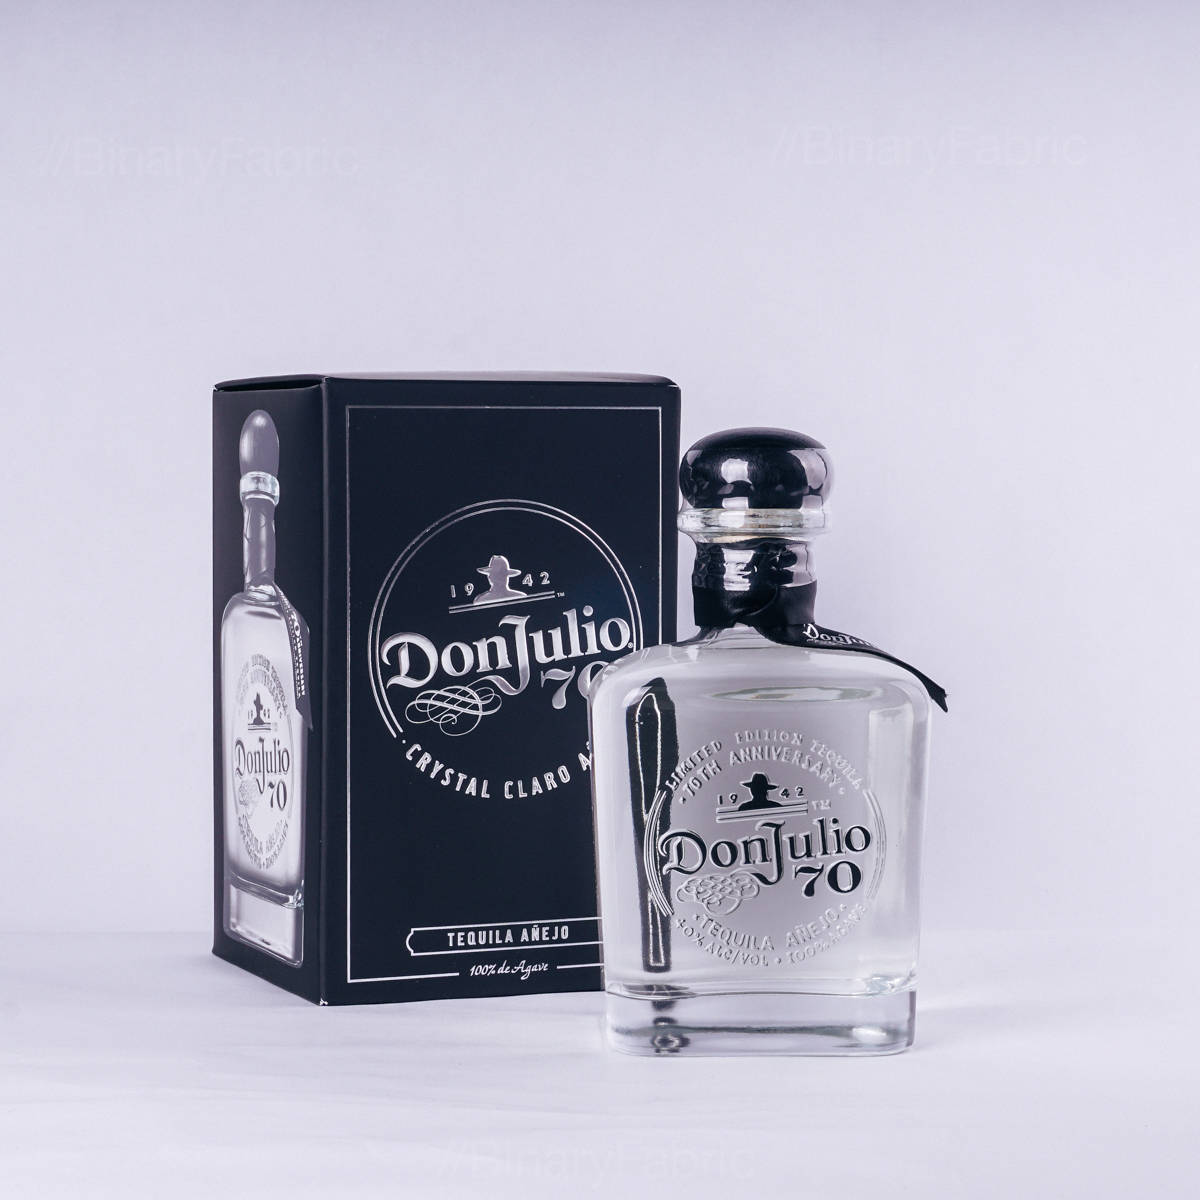 Top 999+ Don Julio Tequila Wallpaper Full HD, 4K✅Free to Use